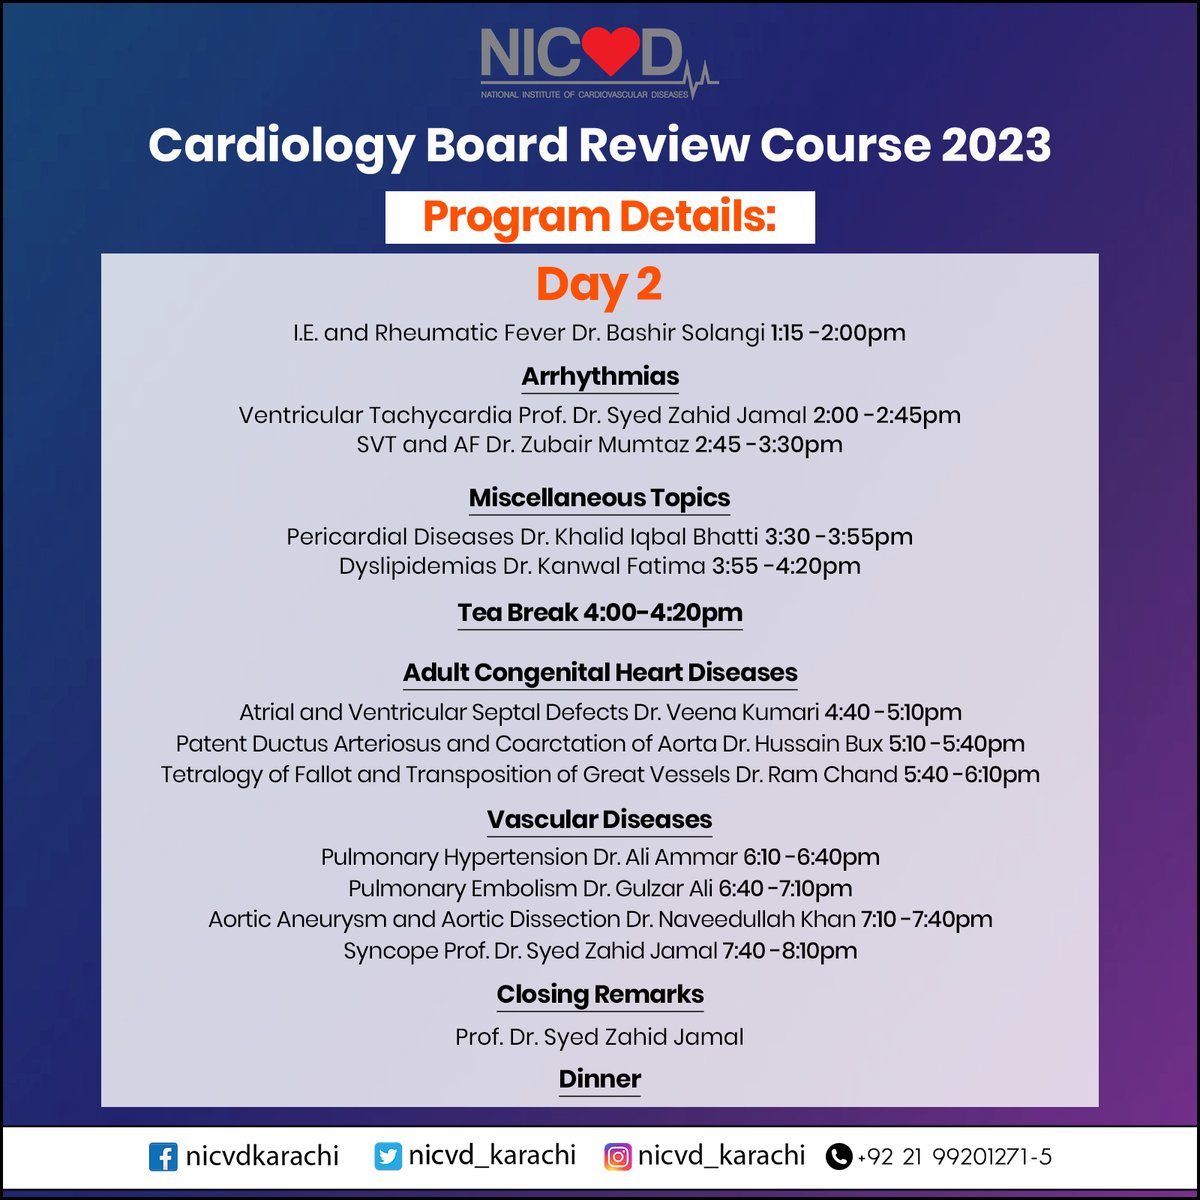 Enhance your knowledge and skills in Cardiology! Join us for a 2-day “Cardiology Board Review Course” on Feb 3rd & 4th. Network with industry experts and expand your professional horizons.

#NICVD #BoardReviewCourse #ContinuingEducation #MedicalProfessional #HealthcareLearning